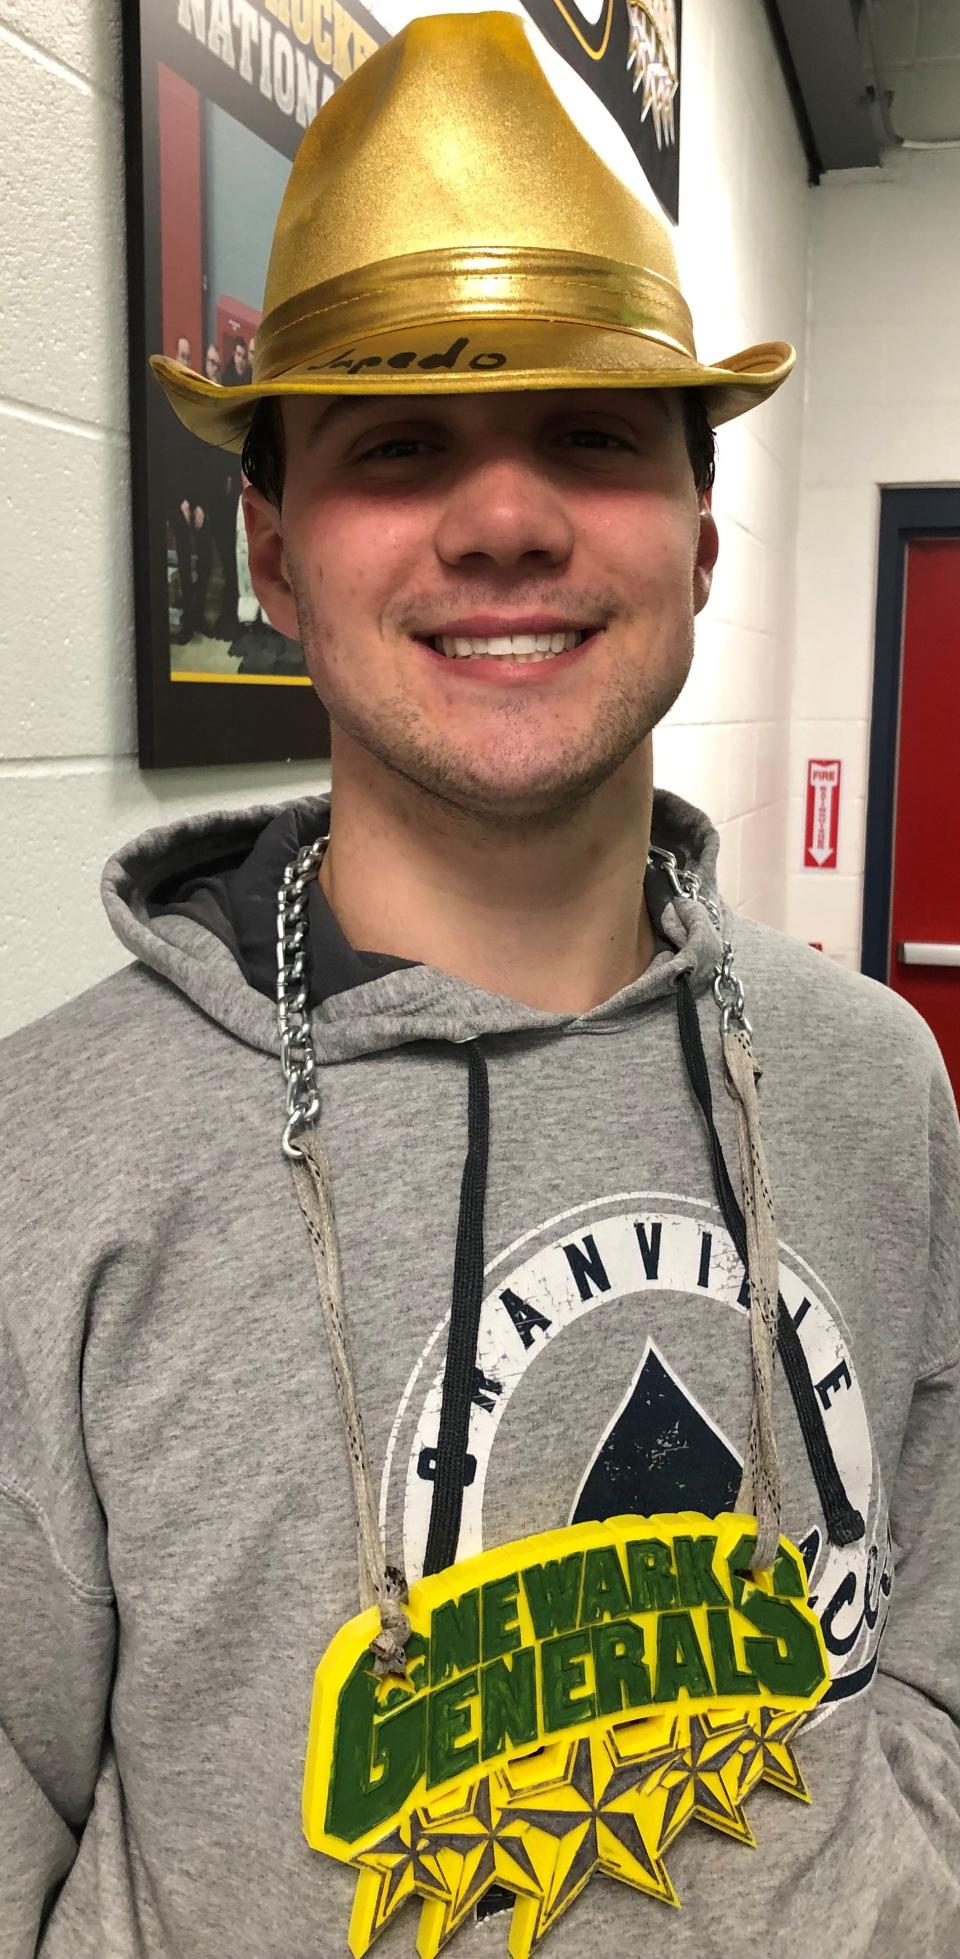 Granville senior Matt Chaykowski won player of the game Thursday for the Newark Generals on Senior Night, scoring the first two goals of a 4-1 win against Westerville at Reese Ice Arena.